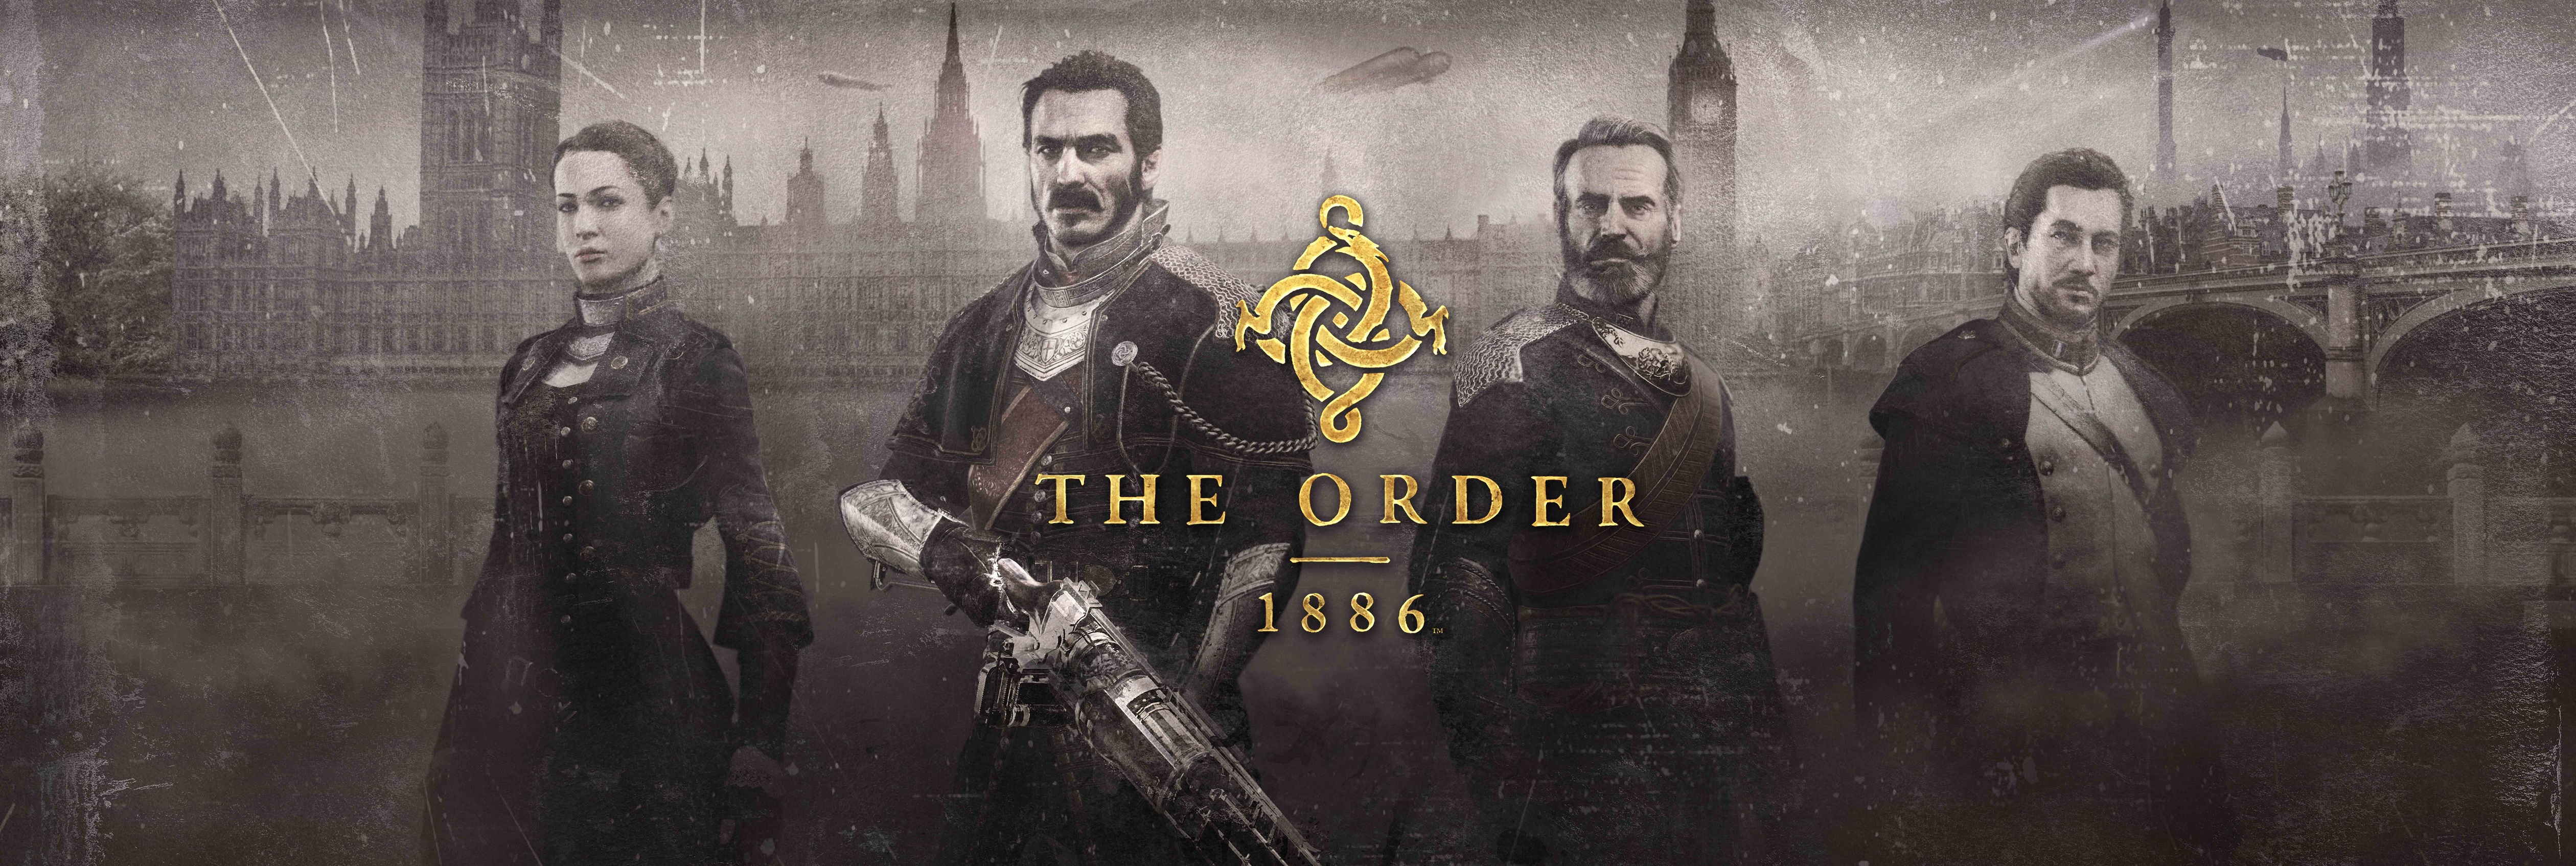 Ps4 1886. The order: 1886. Орден 1886 (ps4). Order 1886 ps4. The order 1886 Постер.